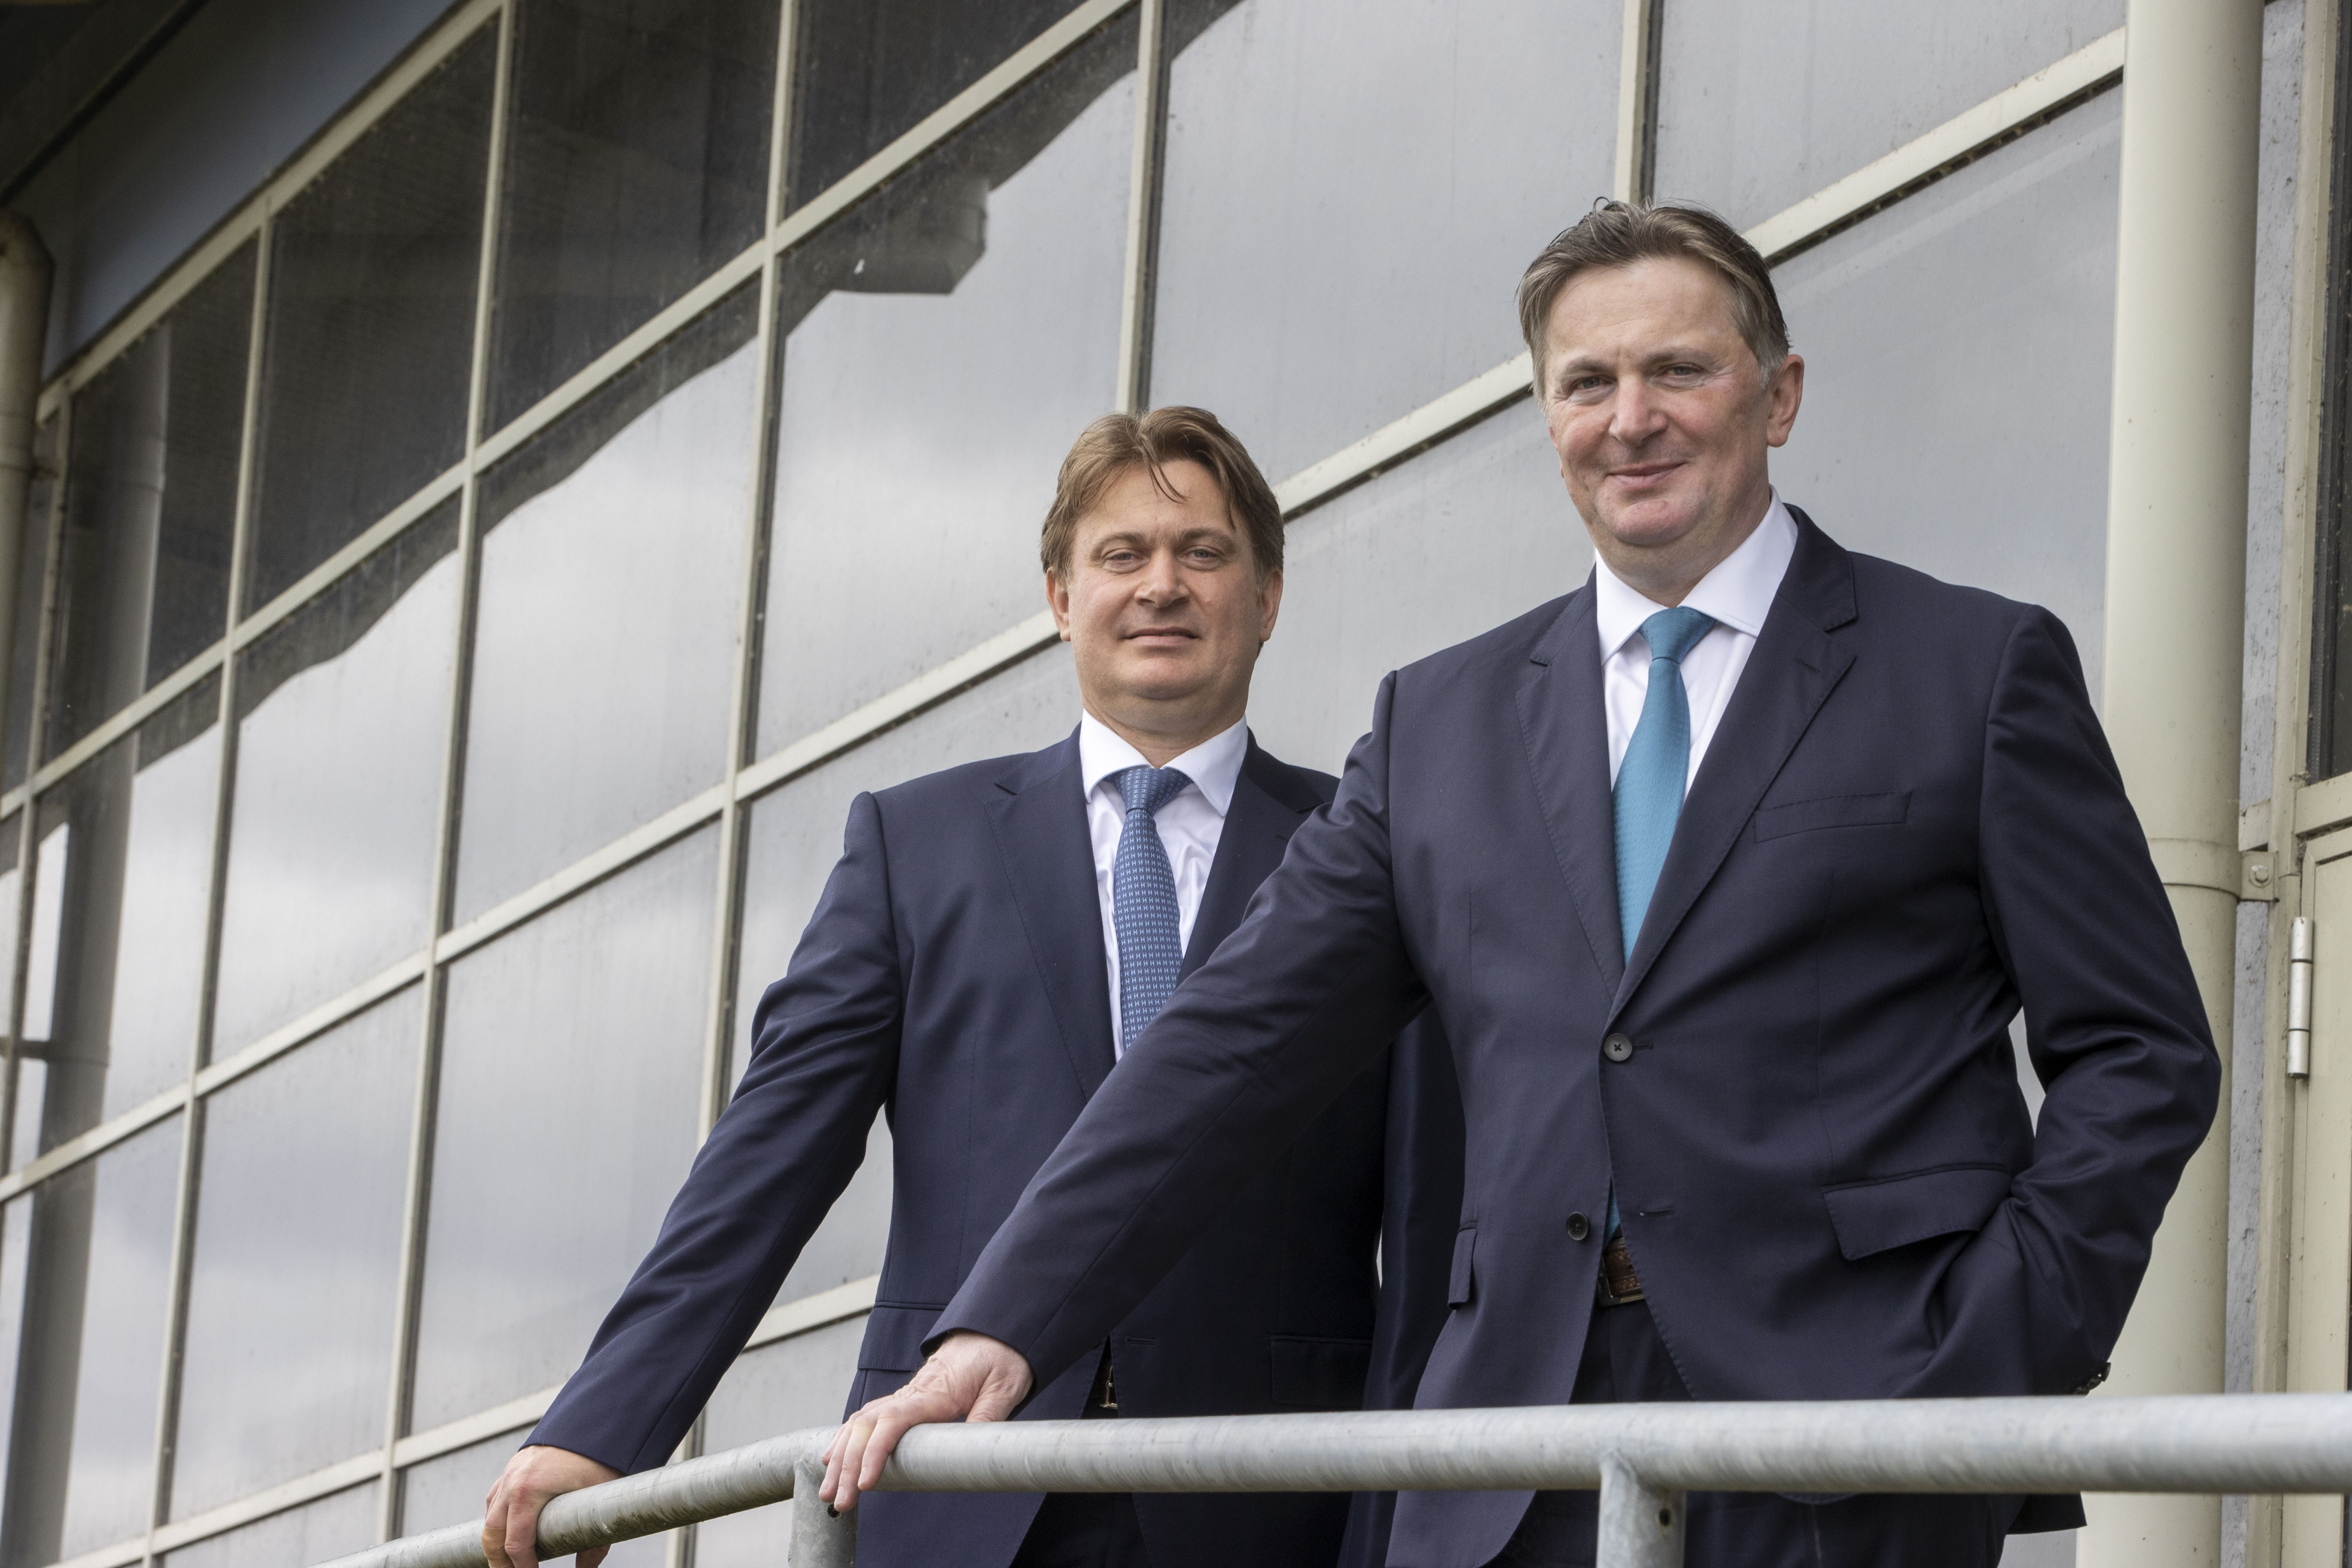 Easdale portfolio tops £400m with Cardross land deal